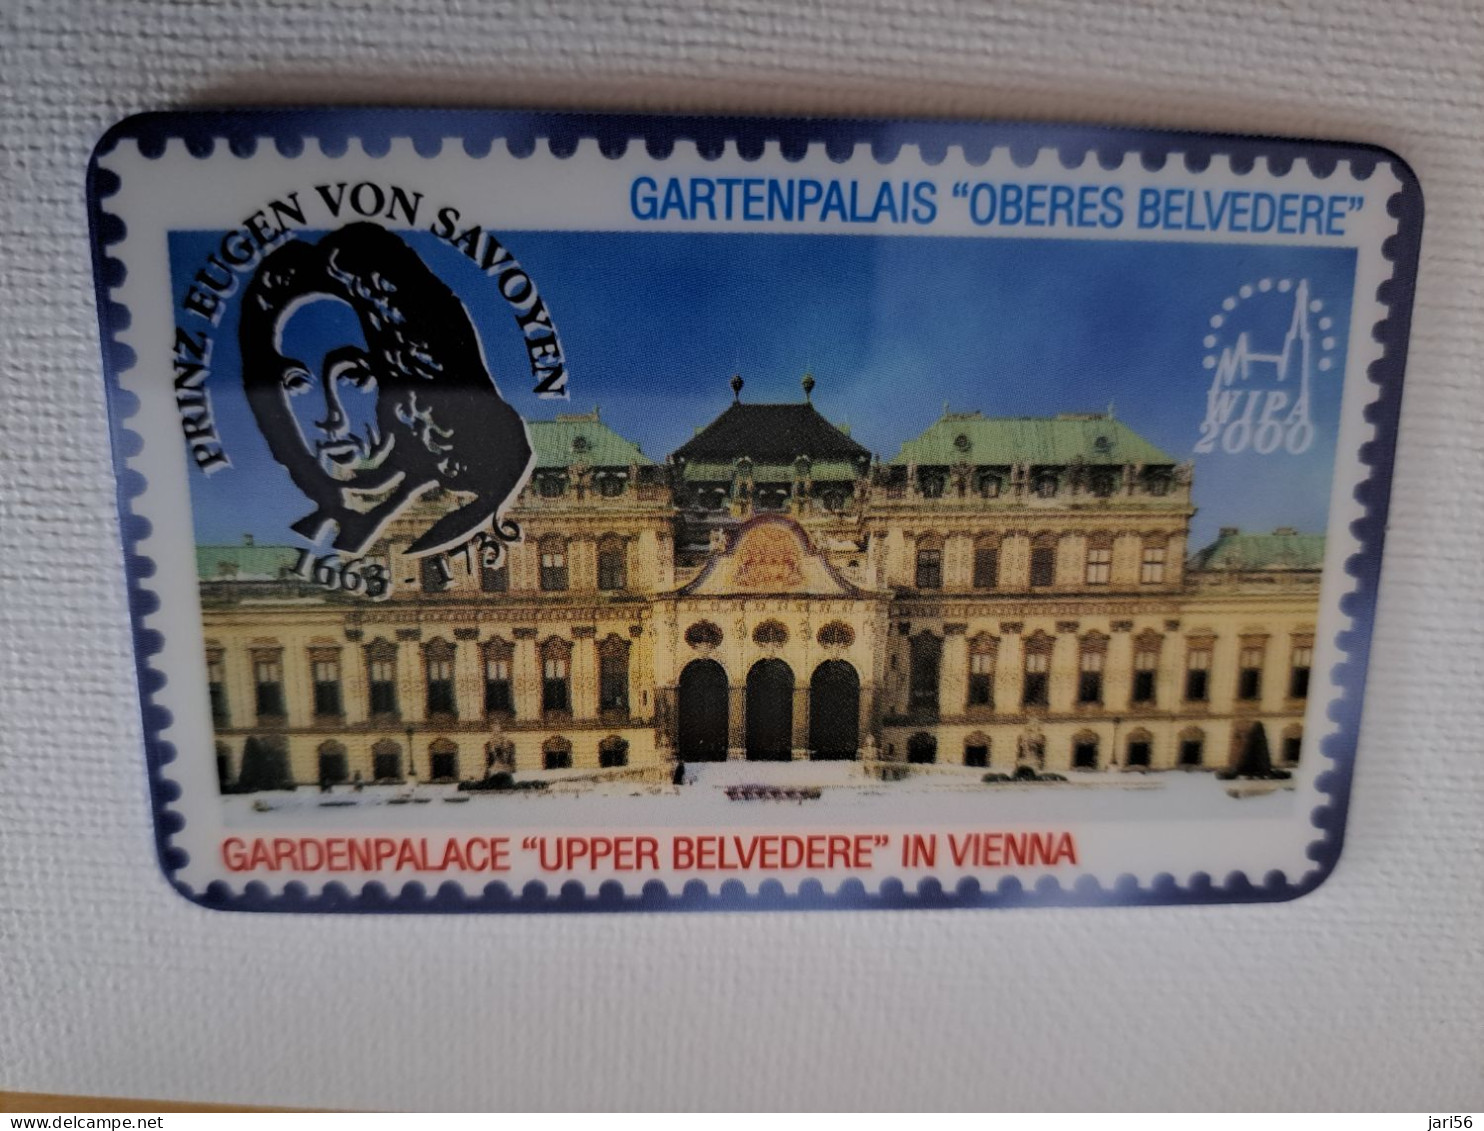 GREAT BRITAIN /20 UNITS / VIENNA/ GARTENPALAIS/ BELVEDERE / STAMPS ON CARD / (date 05/00) PREPAID CARD / MINT  **15756** - [10] Collections